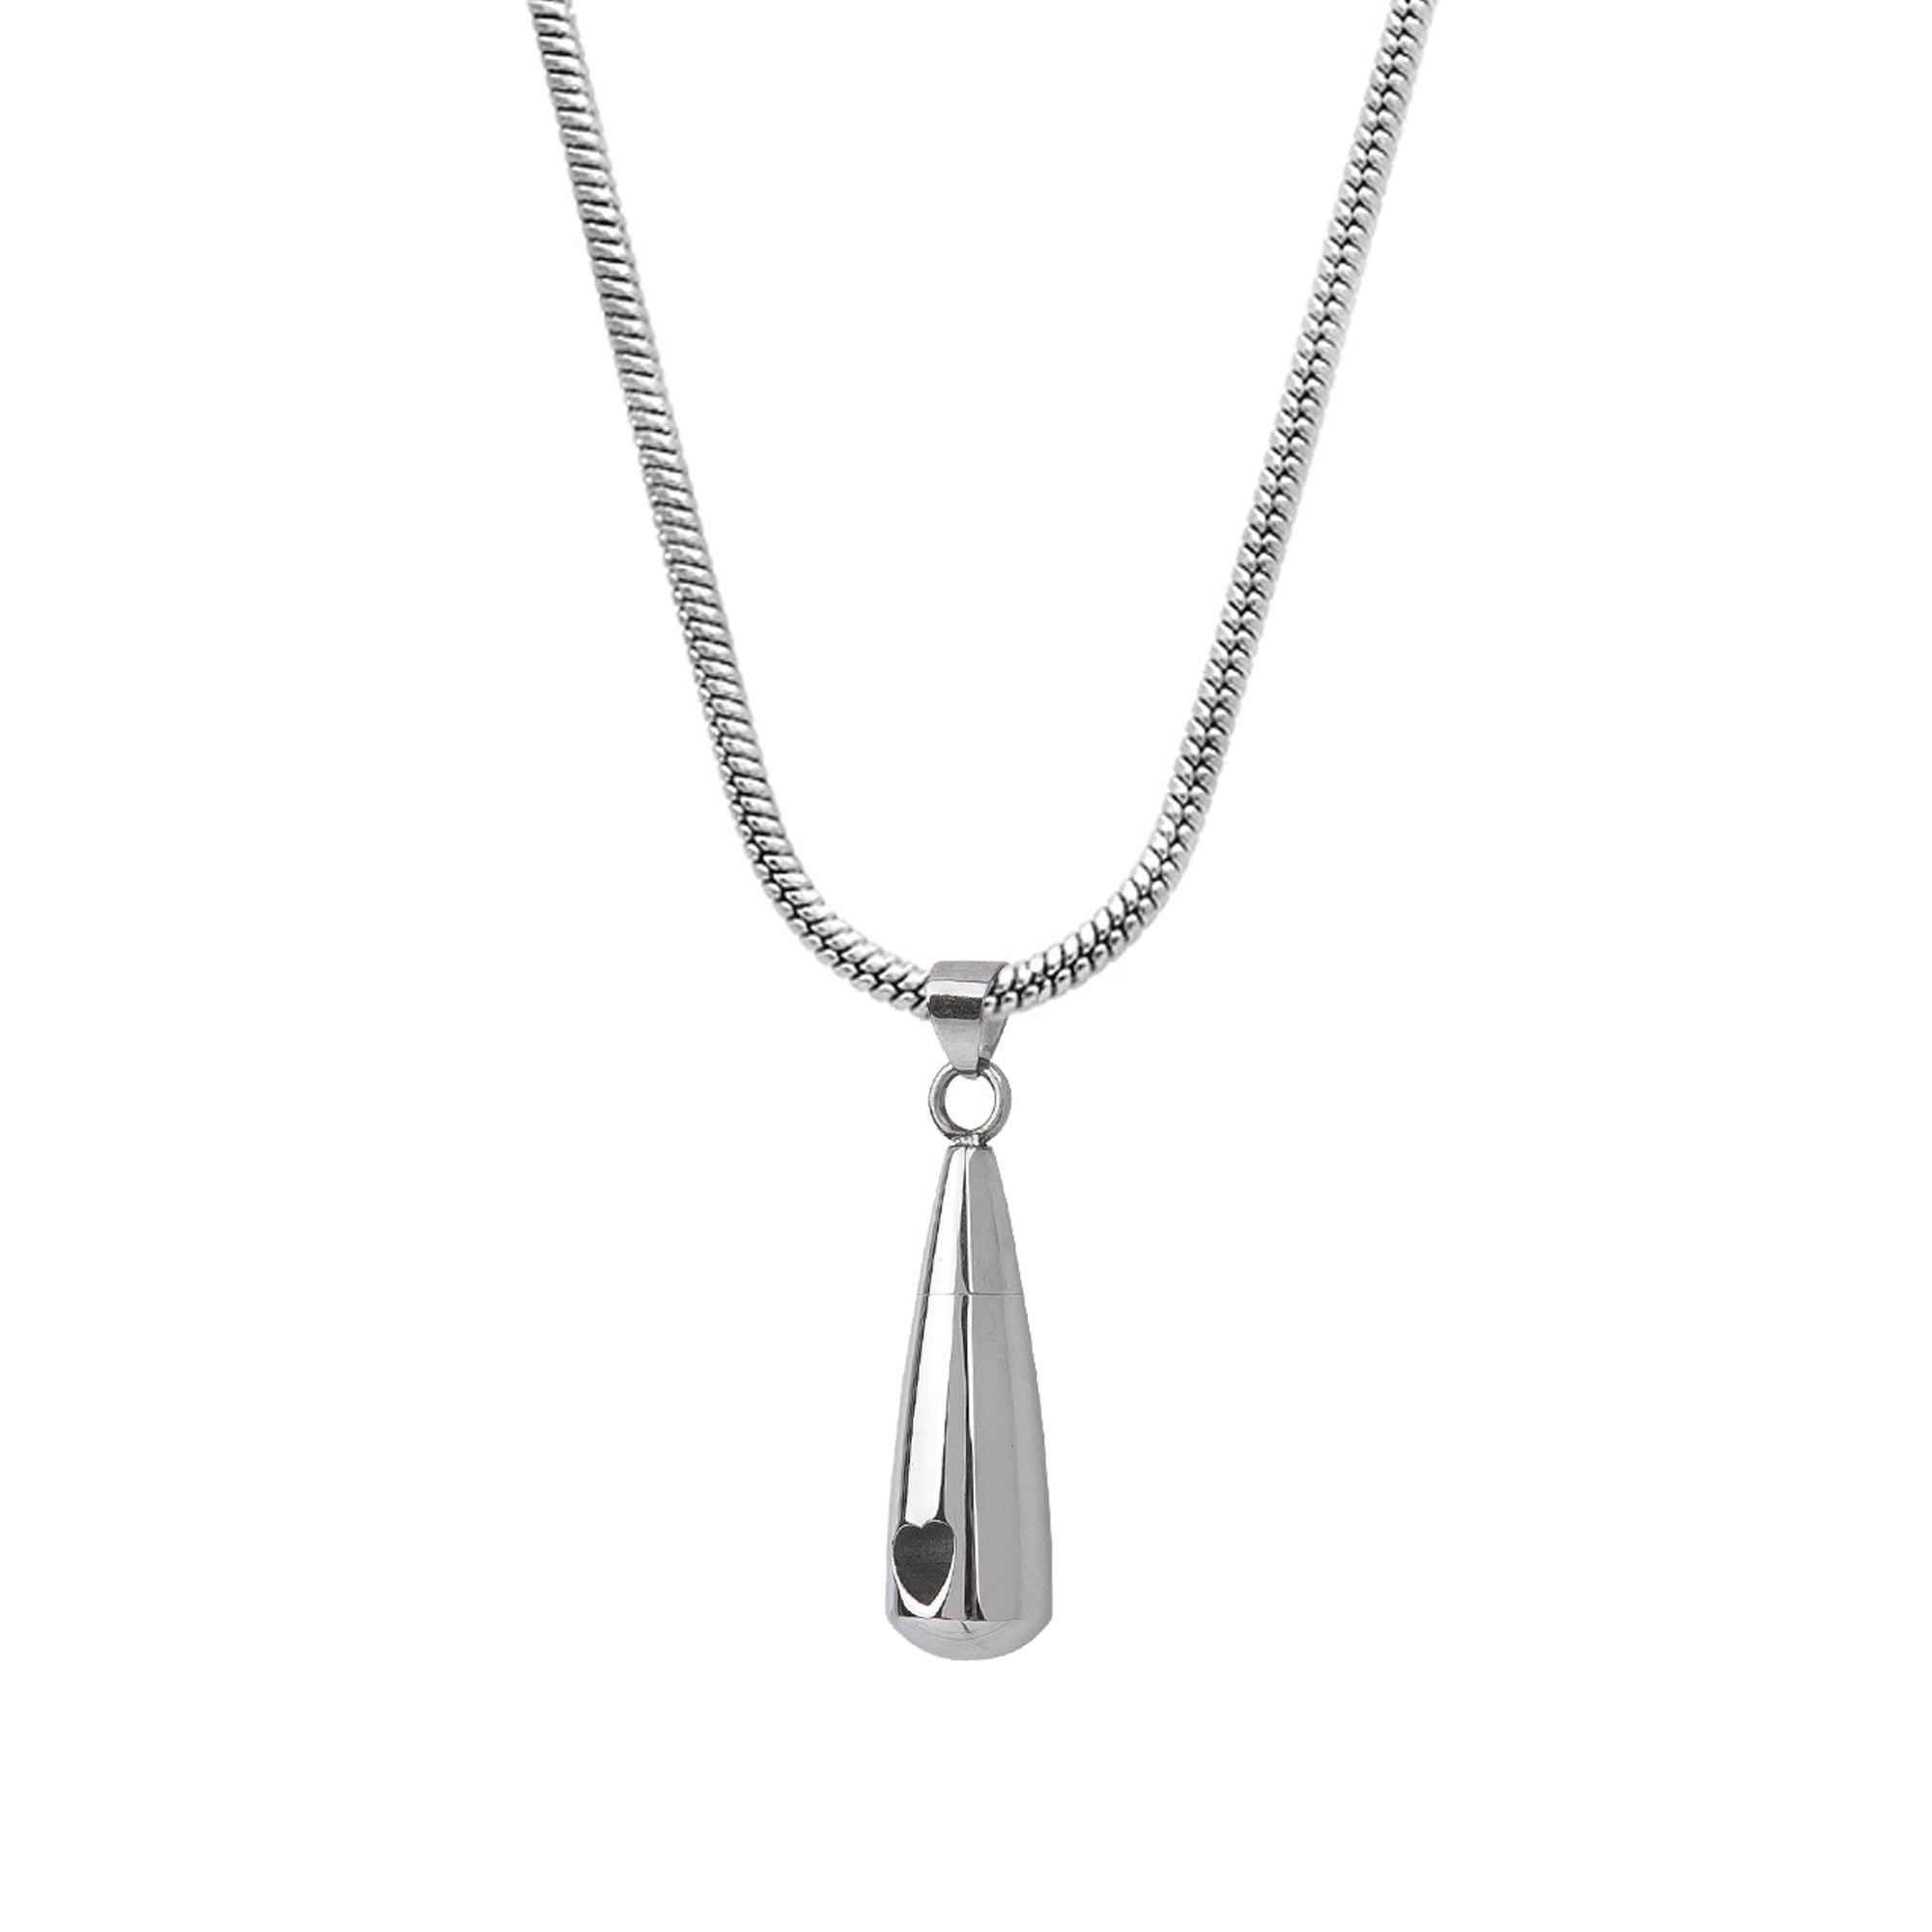 Anavia Silver Tear Drop Memorial Necklace Heart Cut-Out Pendants for Cremated Ashes Holder with Free Funnel Kit and Jewelry Box, Adult Unisex, Size